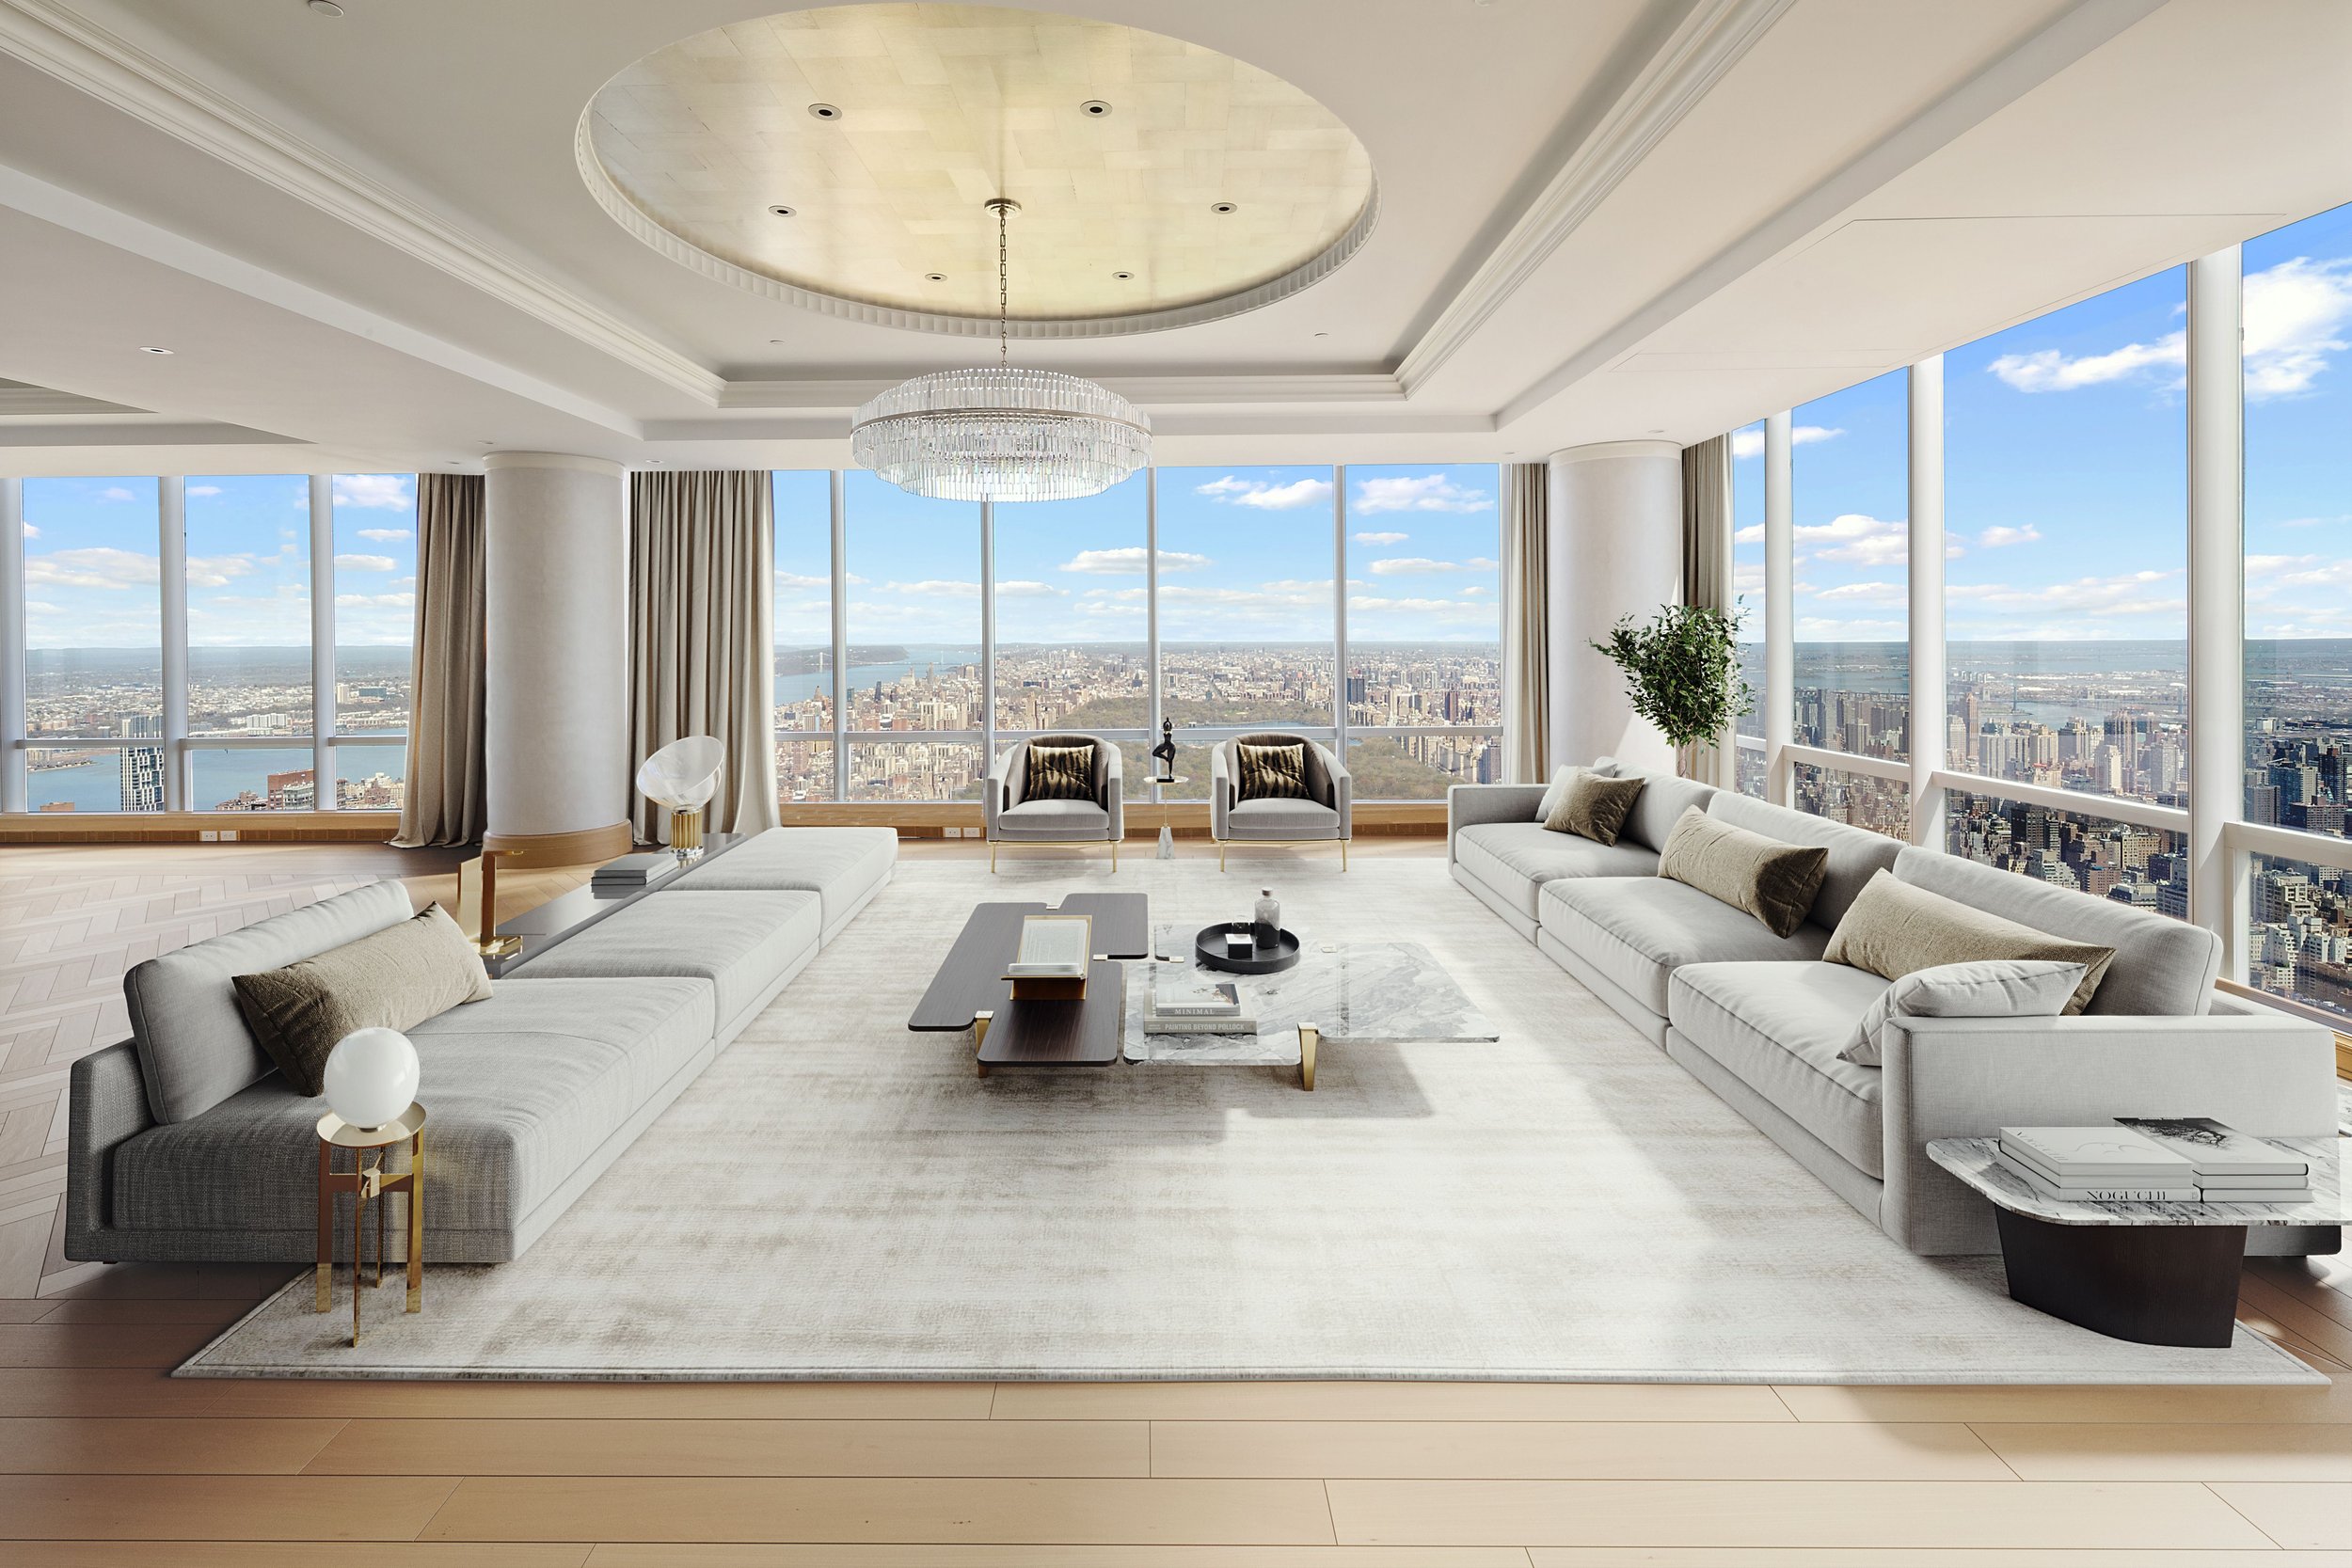  Introducing the ultimate luxury living experience in New York City: a magnificent 5-bedroom, 5-bathroom sky mansion on the 88th floor of the prestigious One57 tower. This Billionaires' Row residence boasts unbeatable 360-degree views of Central Park